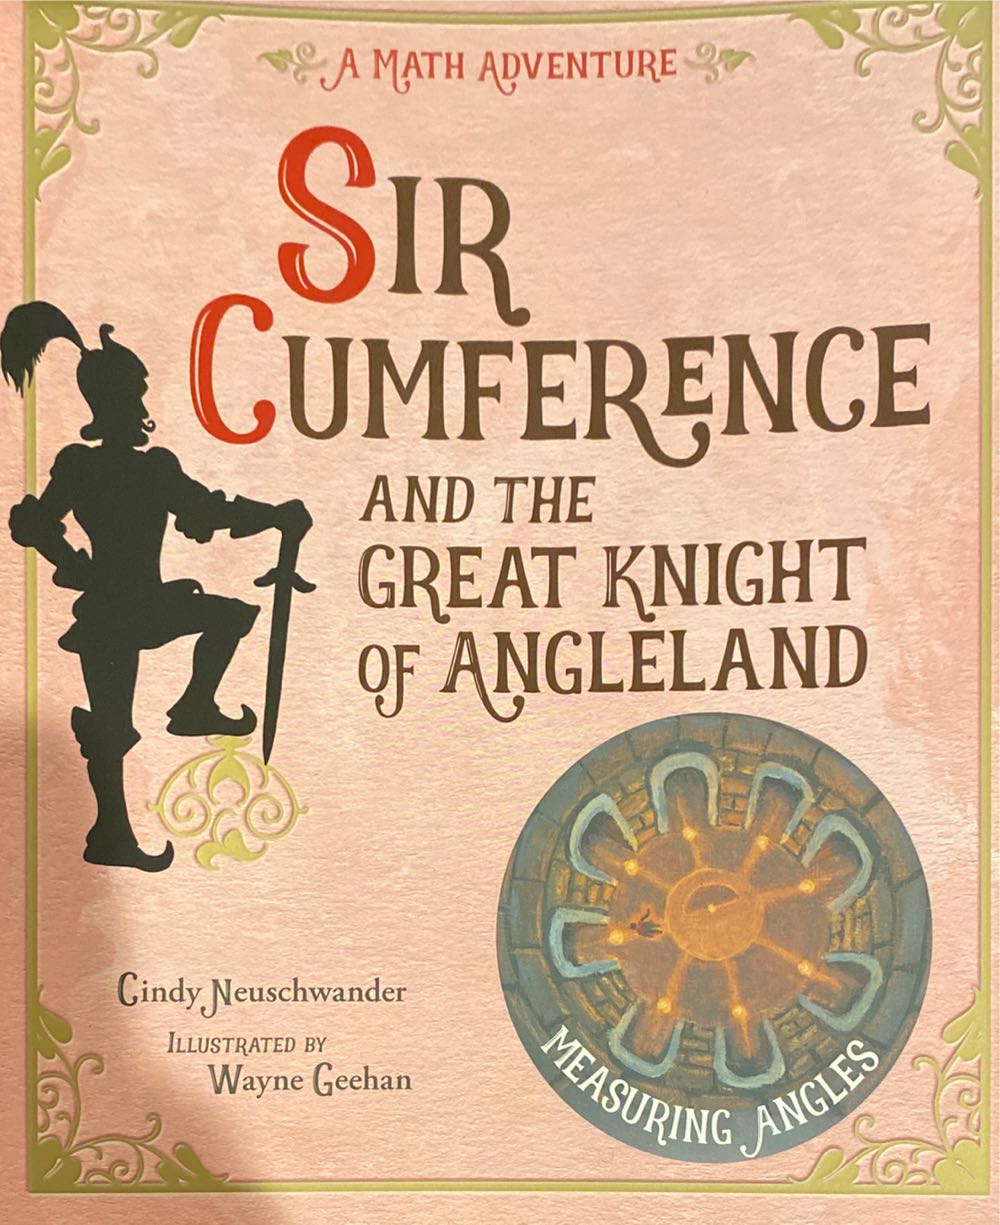 Sir Cumference And The Great Knight Of Angleland - Cindy Neuschwander (Scholastic Inc. - Paperback) book collectible [Barcode 9781570911699] - Main Image 2